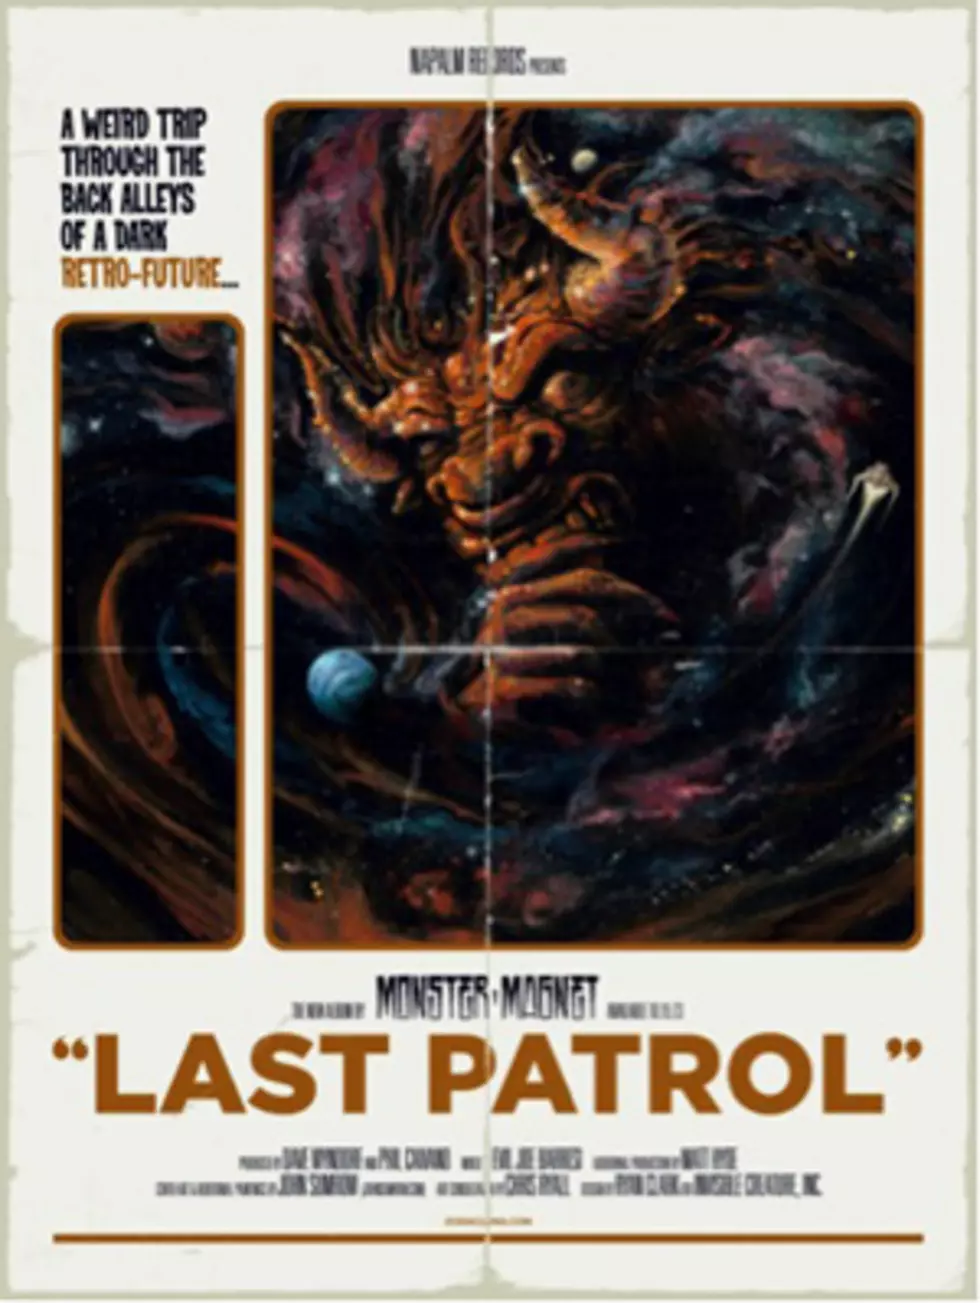 Monster Magnet Making Return With New Album ‘Last Patrol’ + 2013 North American Tour Dates